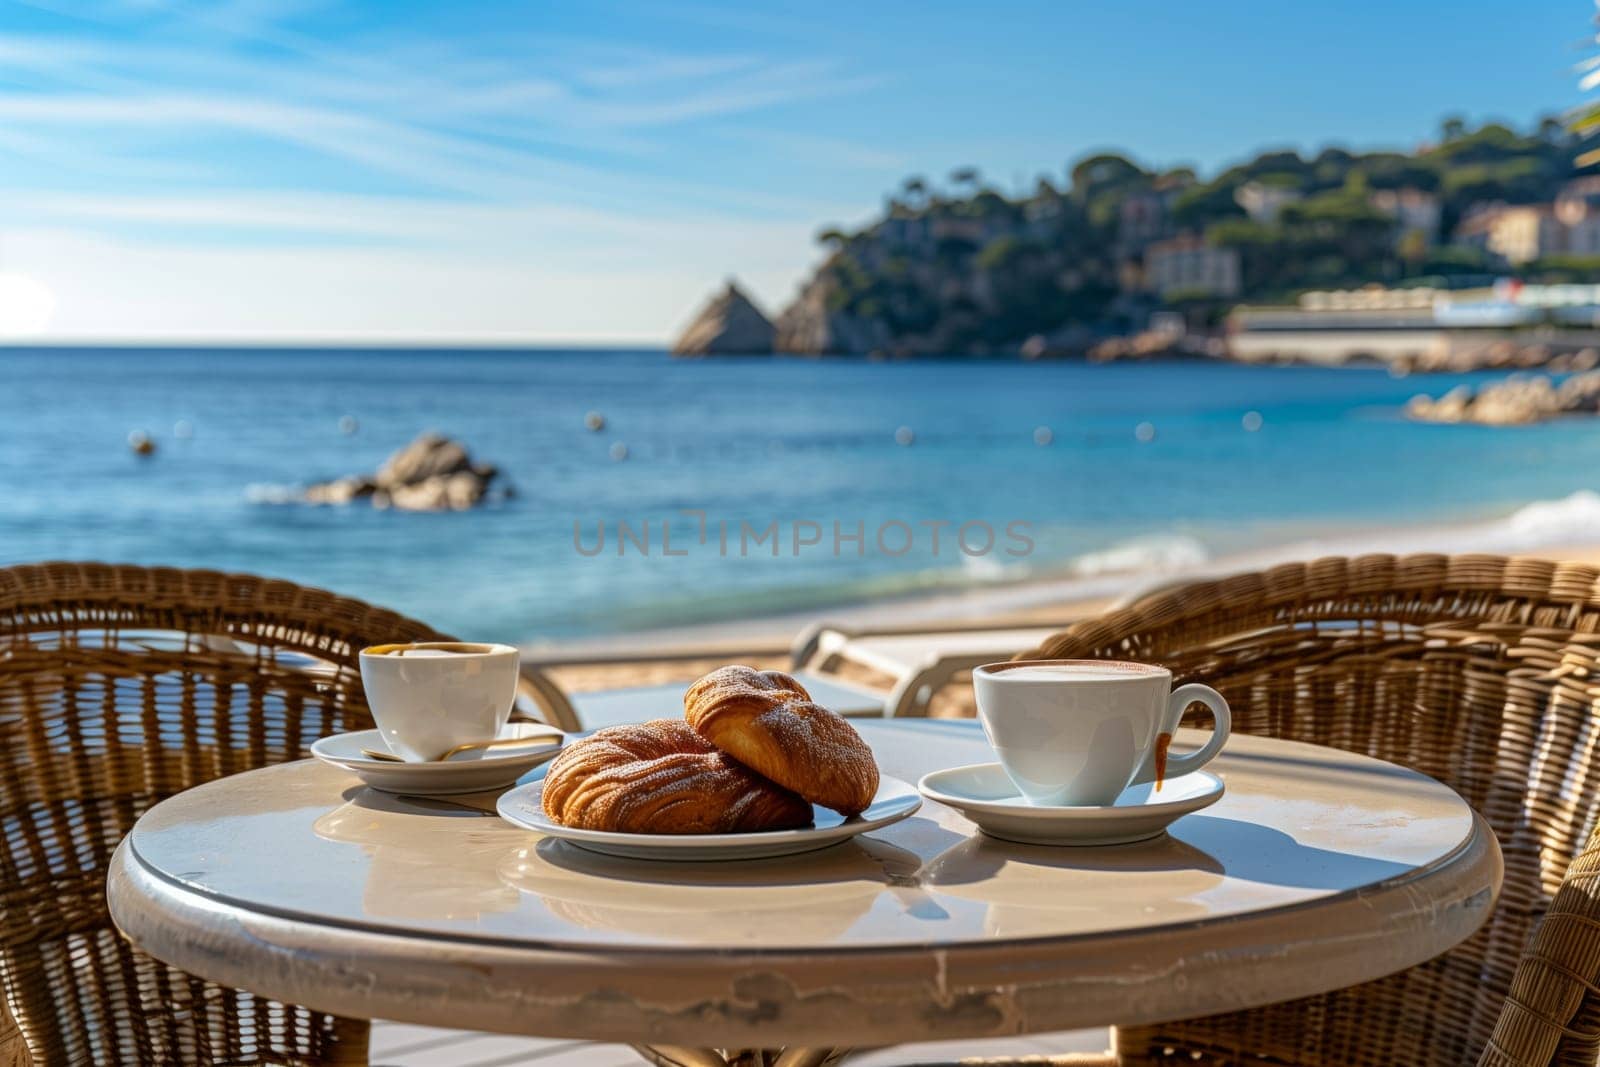 A table on the beach is set with two cups of coffee, croissants, overlooking the azure water, under a sky filled with fluffy clouds. A perfect spot to enjoy a natural landscape while traveling